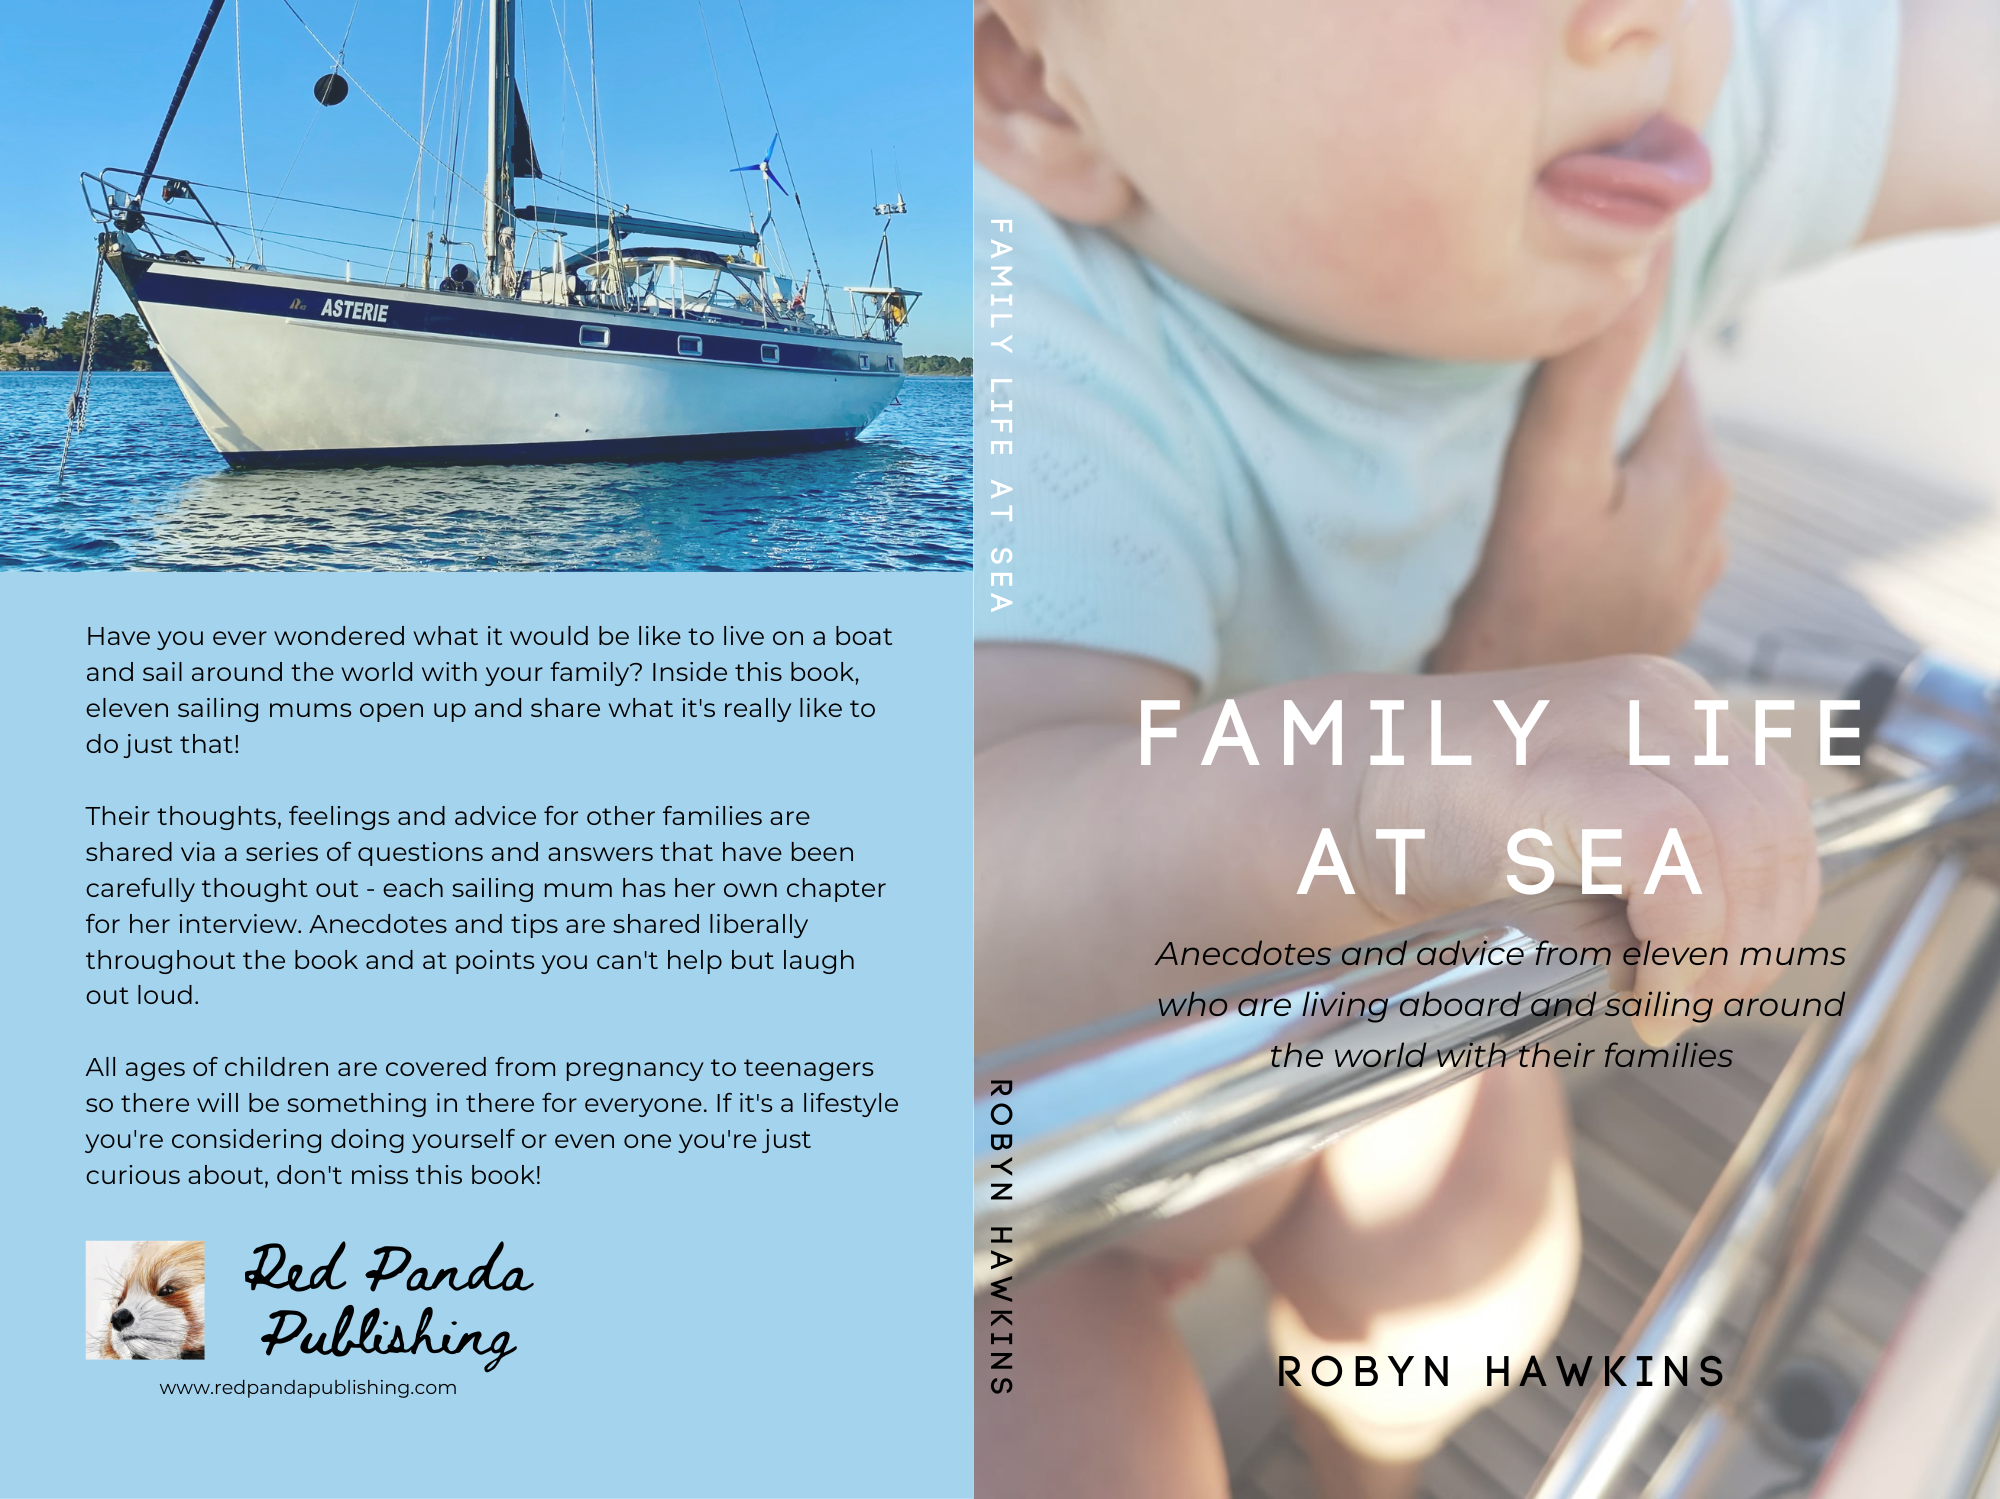 The front and back cover of the book 'Family Life at Sea'